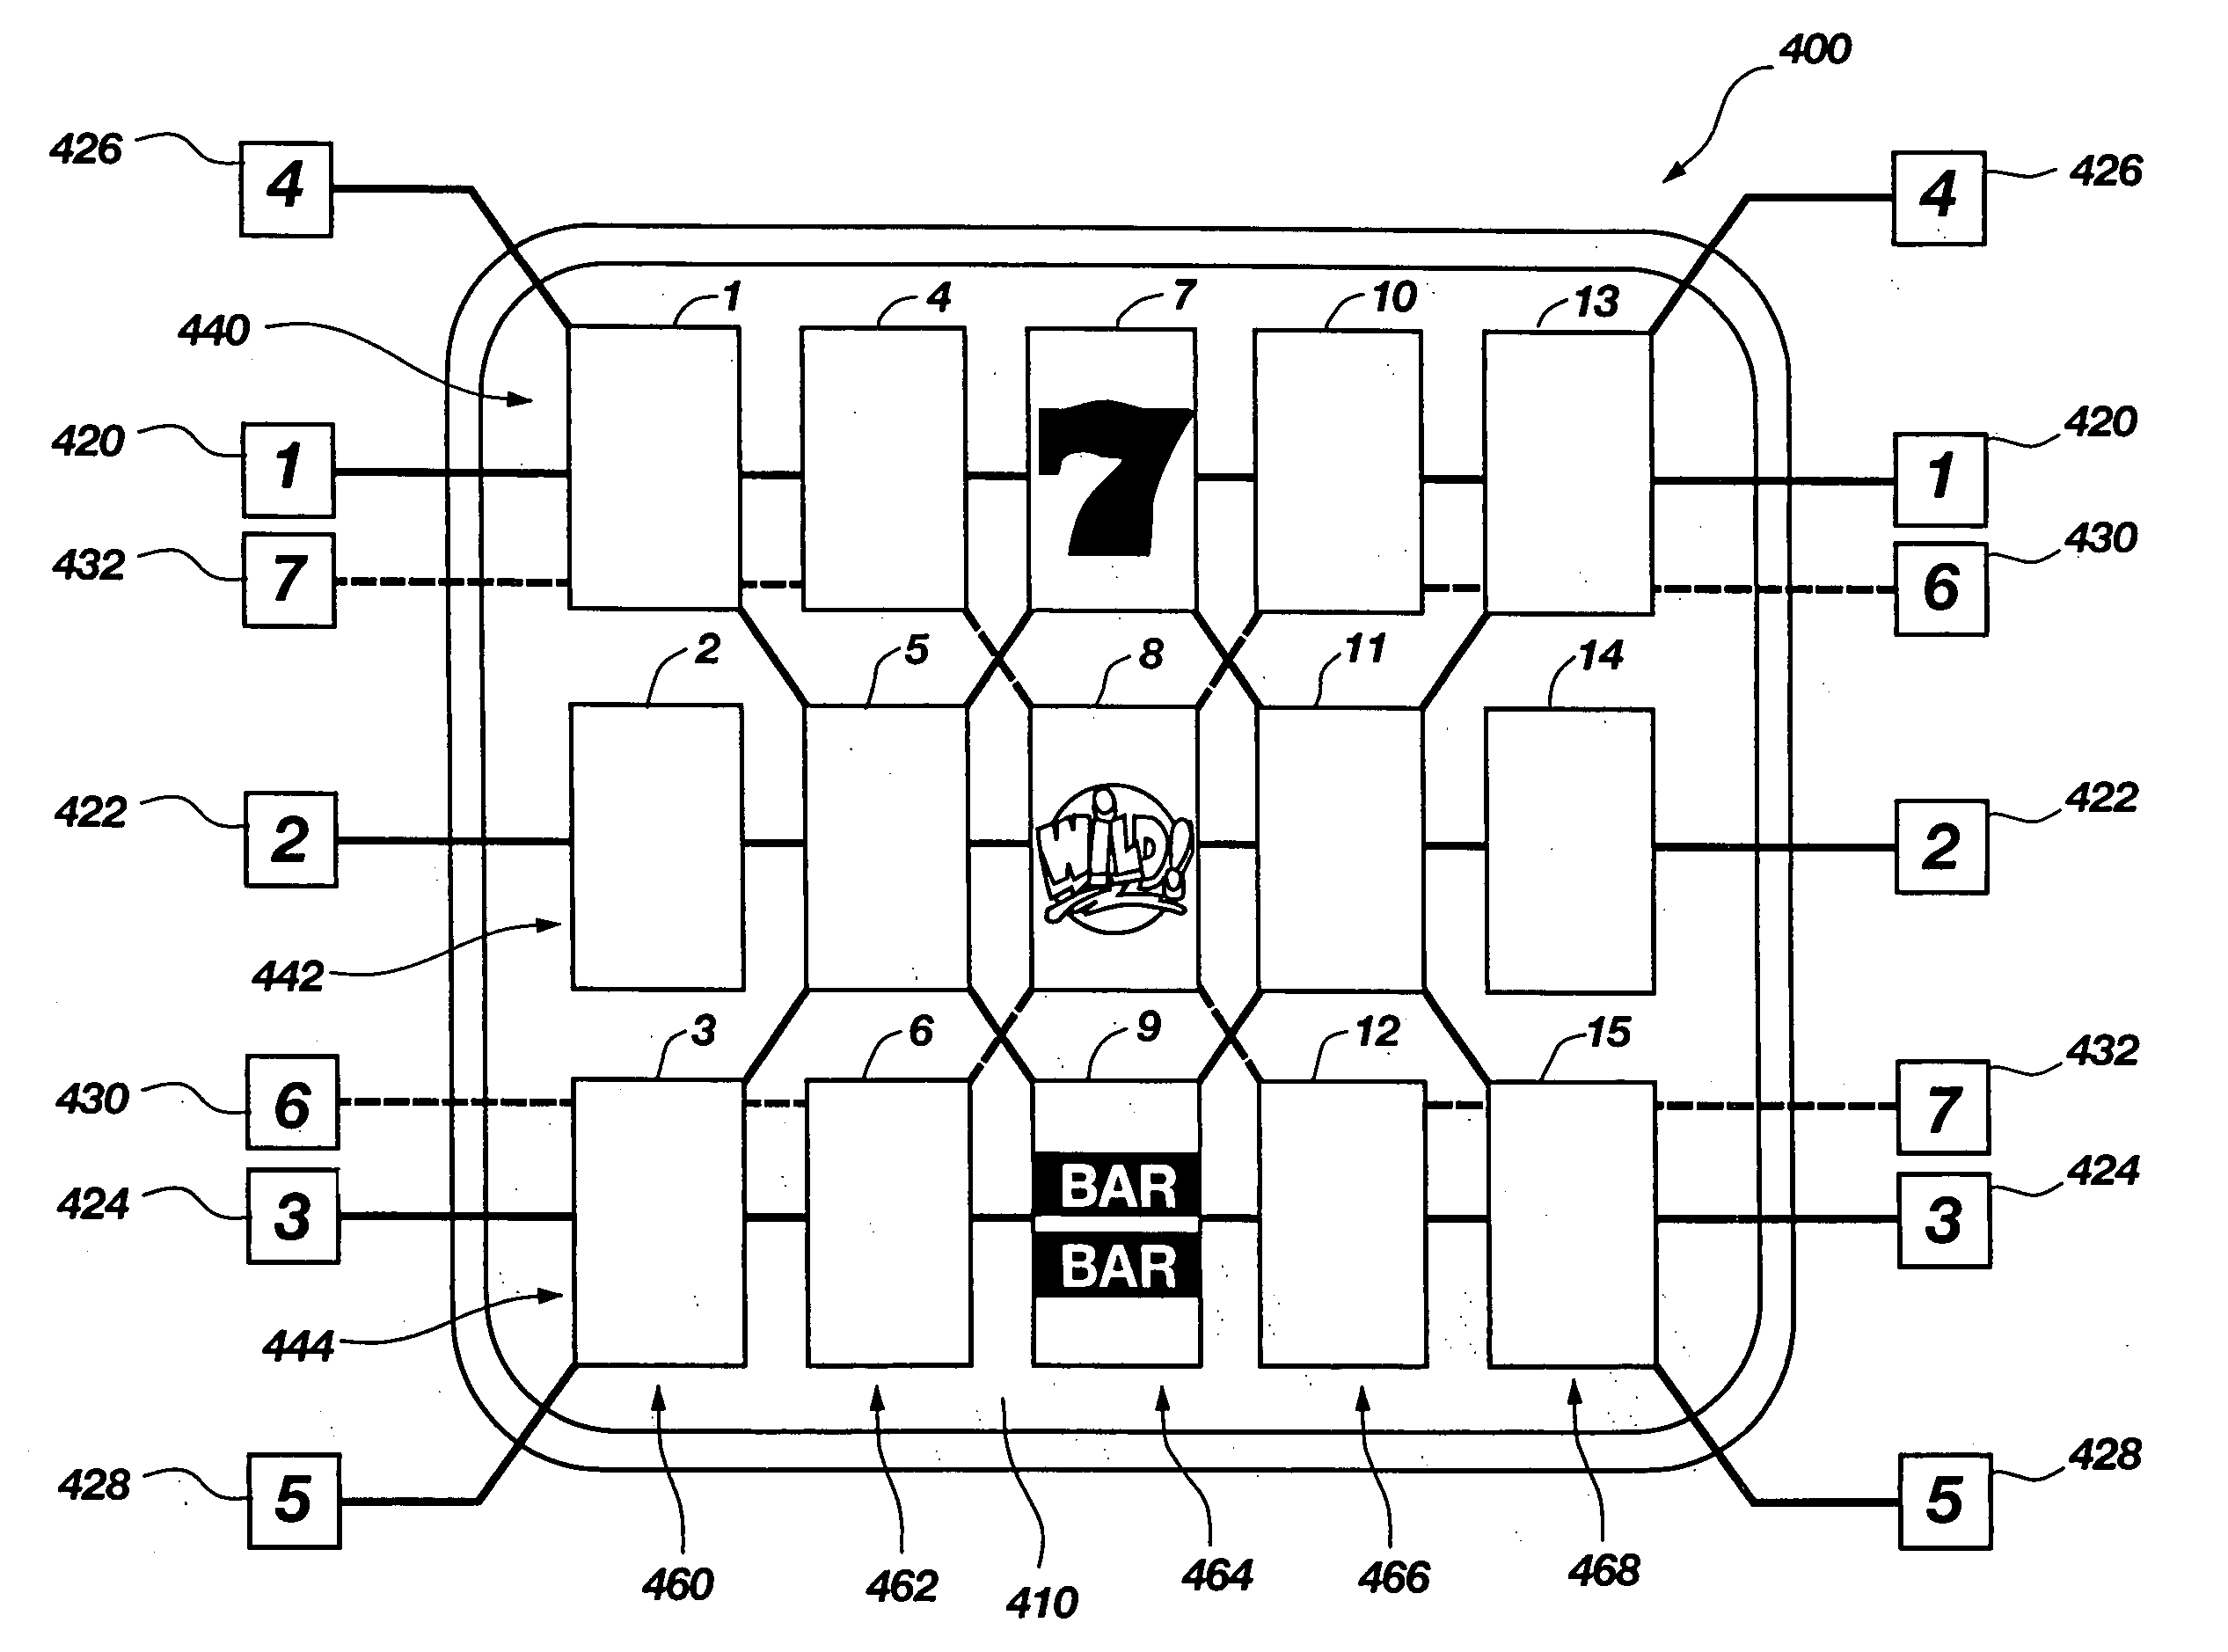 Method and apparatus for selecting pay lines based on a partial outcome of a slots game